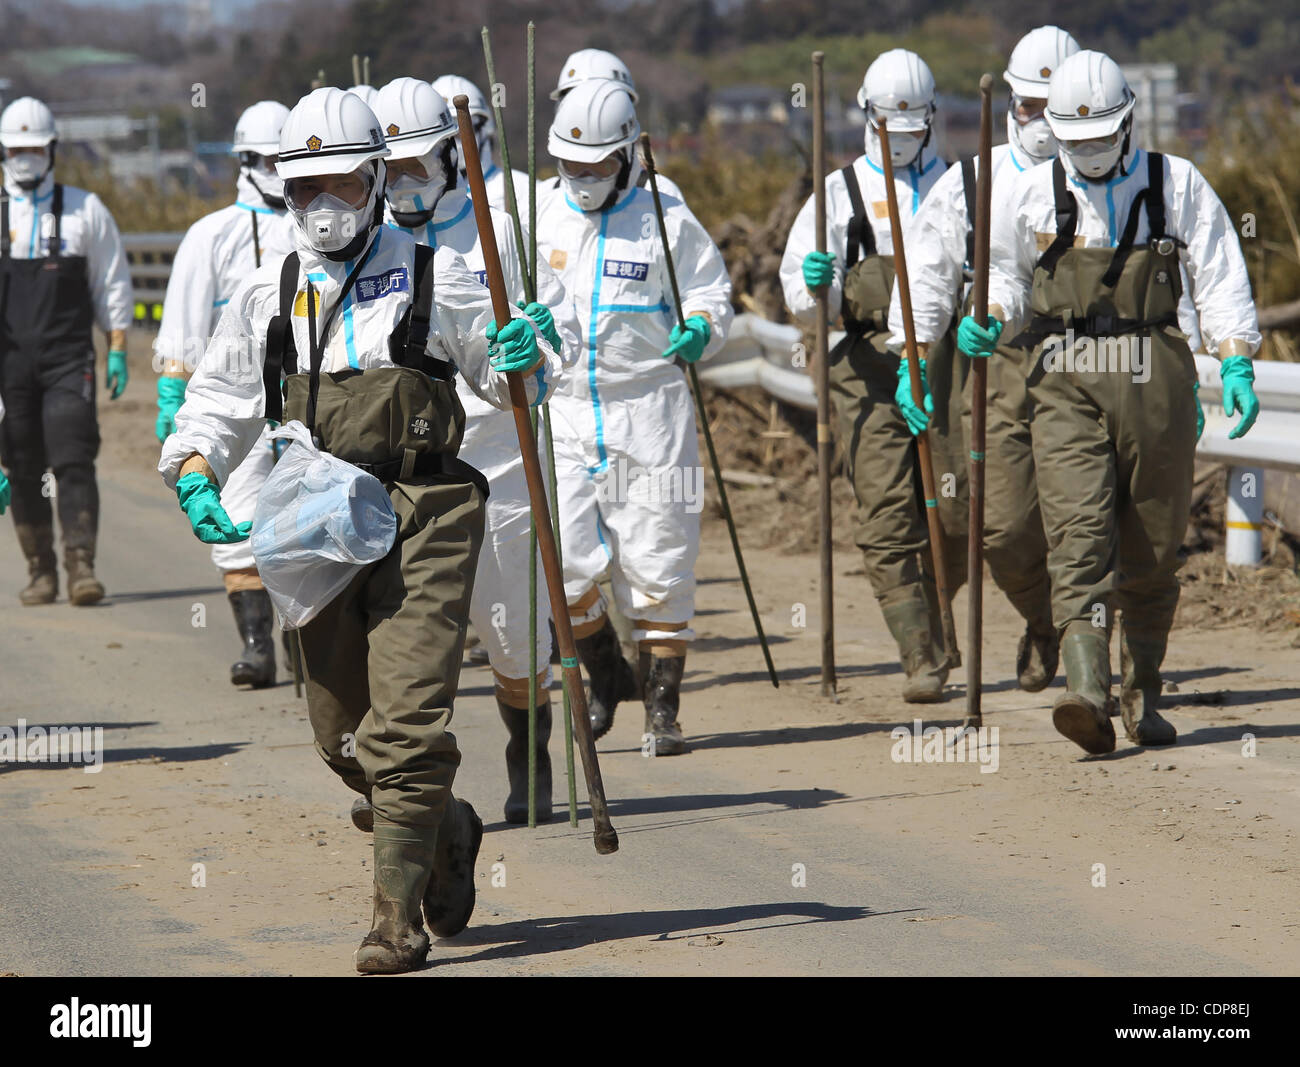 Apr. 17, 2011 - Namie, Japan - Police officers wearing the radiation protective gears search for missing persons in where the Fukushima Daiichi nuclear plant in Namie Town, Fukushima Prefecture, Japan. The Japanese Government has set up a policy to appoint certain area within the distance of 20 km f Stock Photo